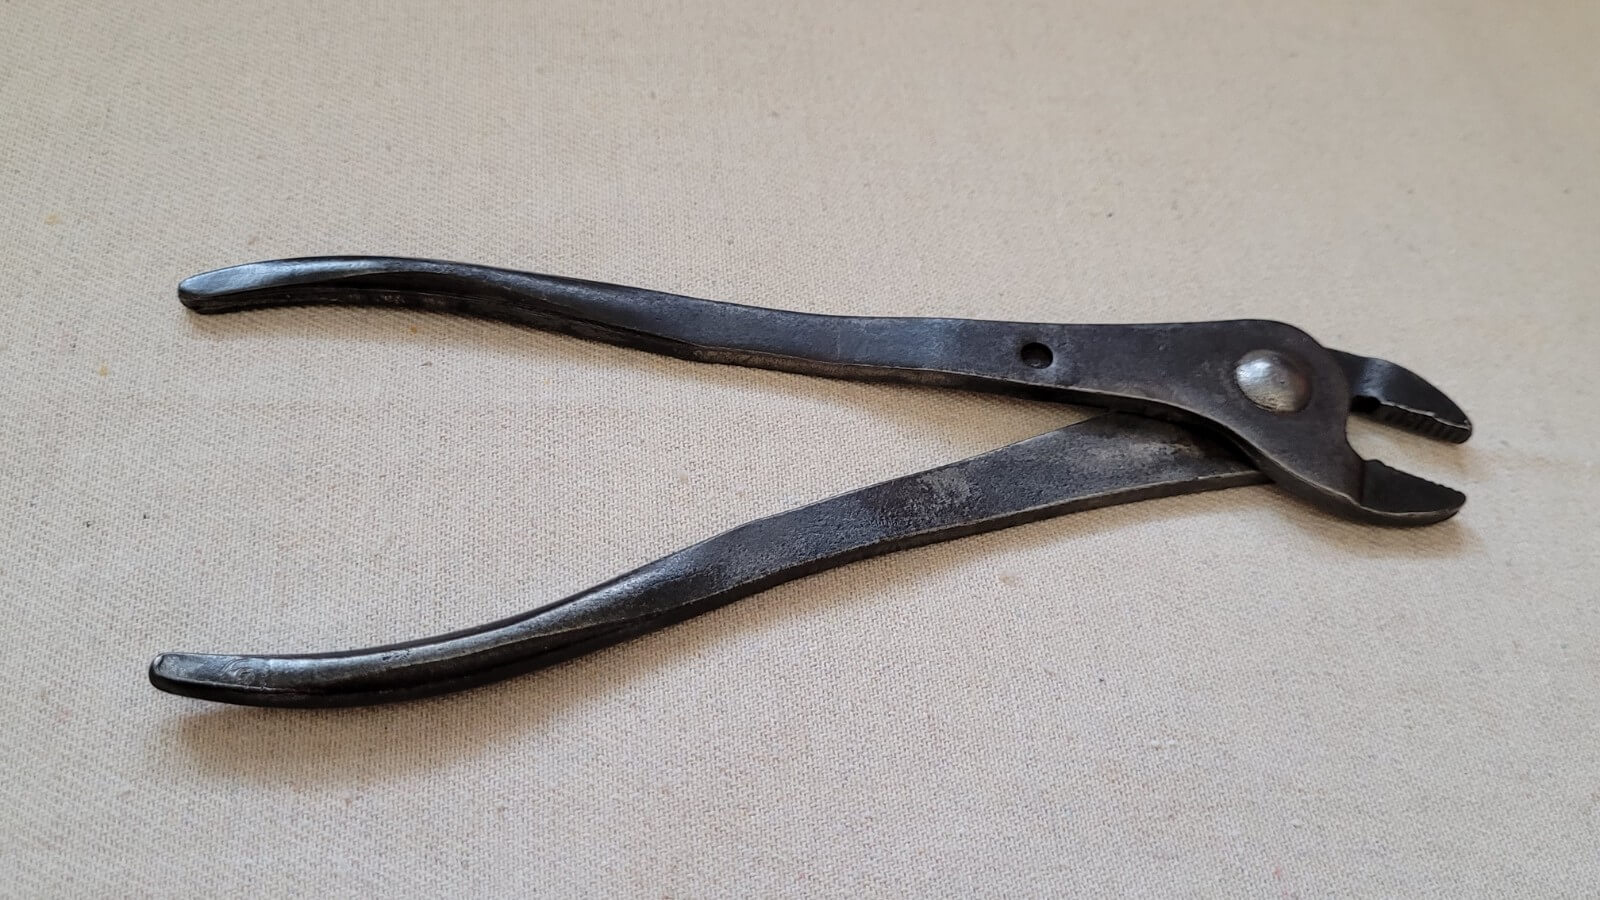 Vintage Lectrolite Corp Battery Terminal Pliers Defiance Ohio Made in USA Collectible Tools